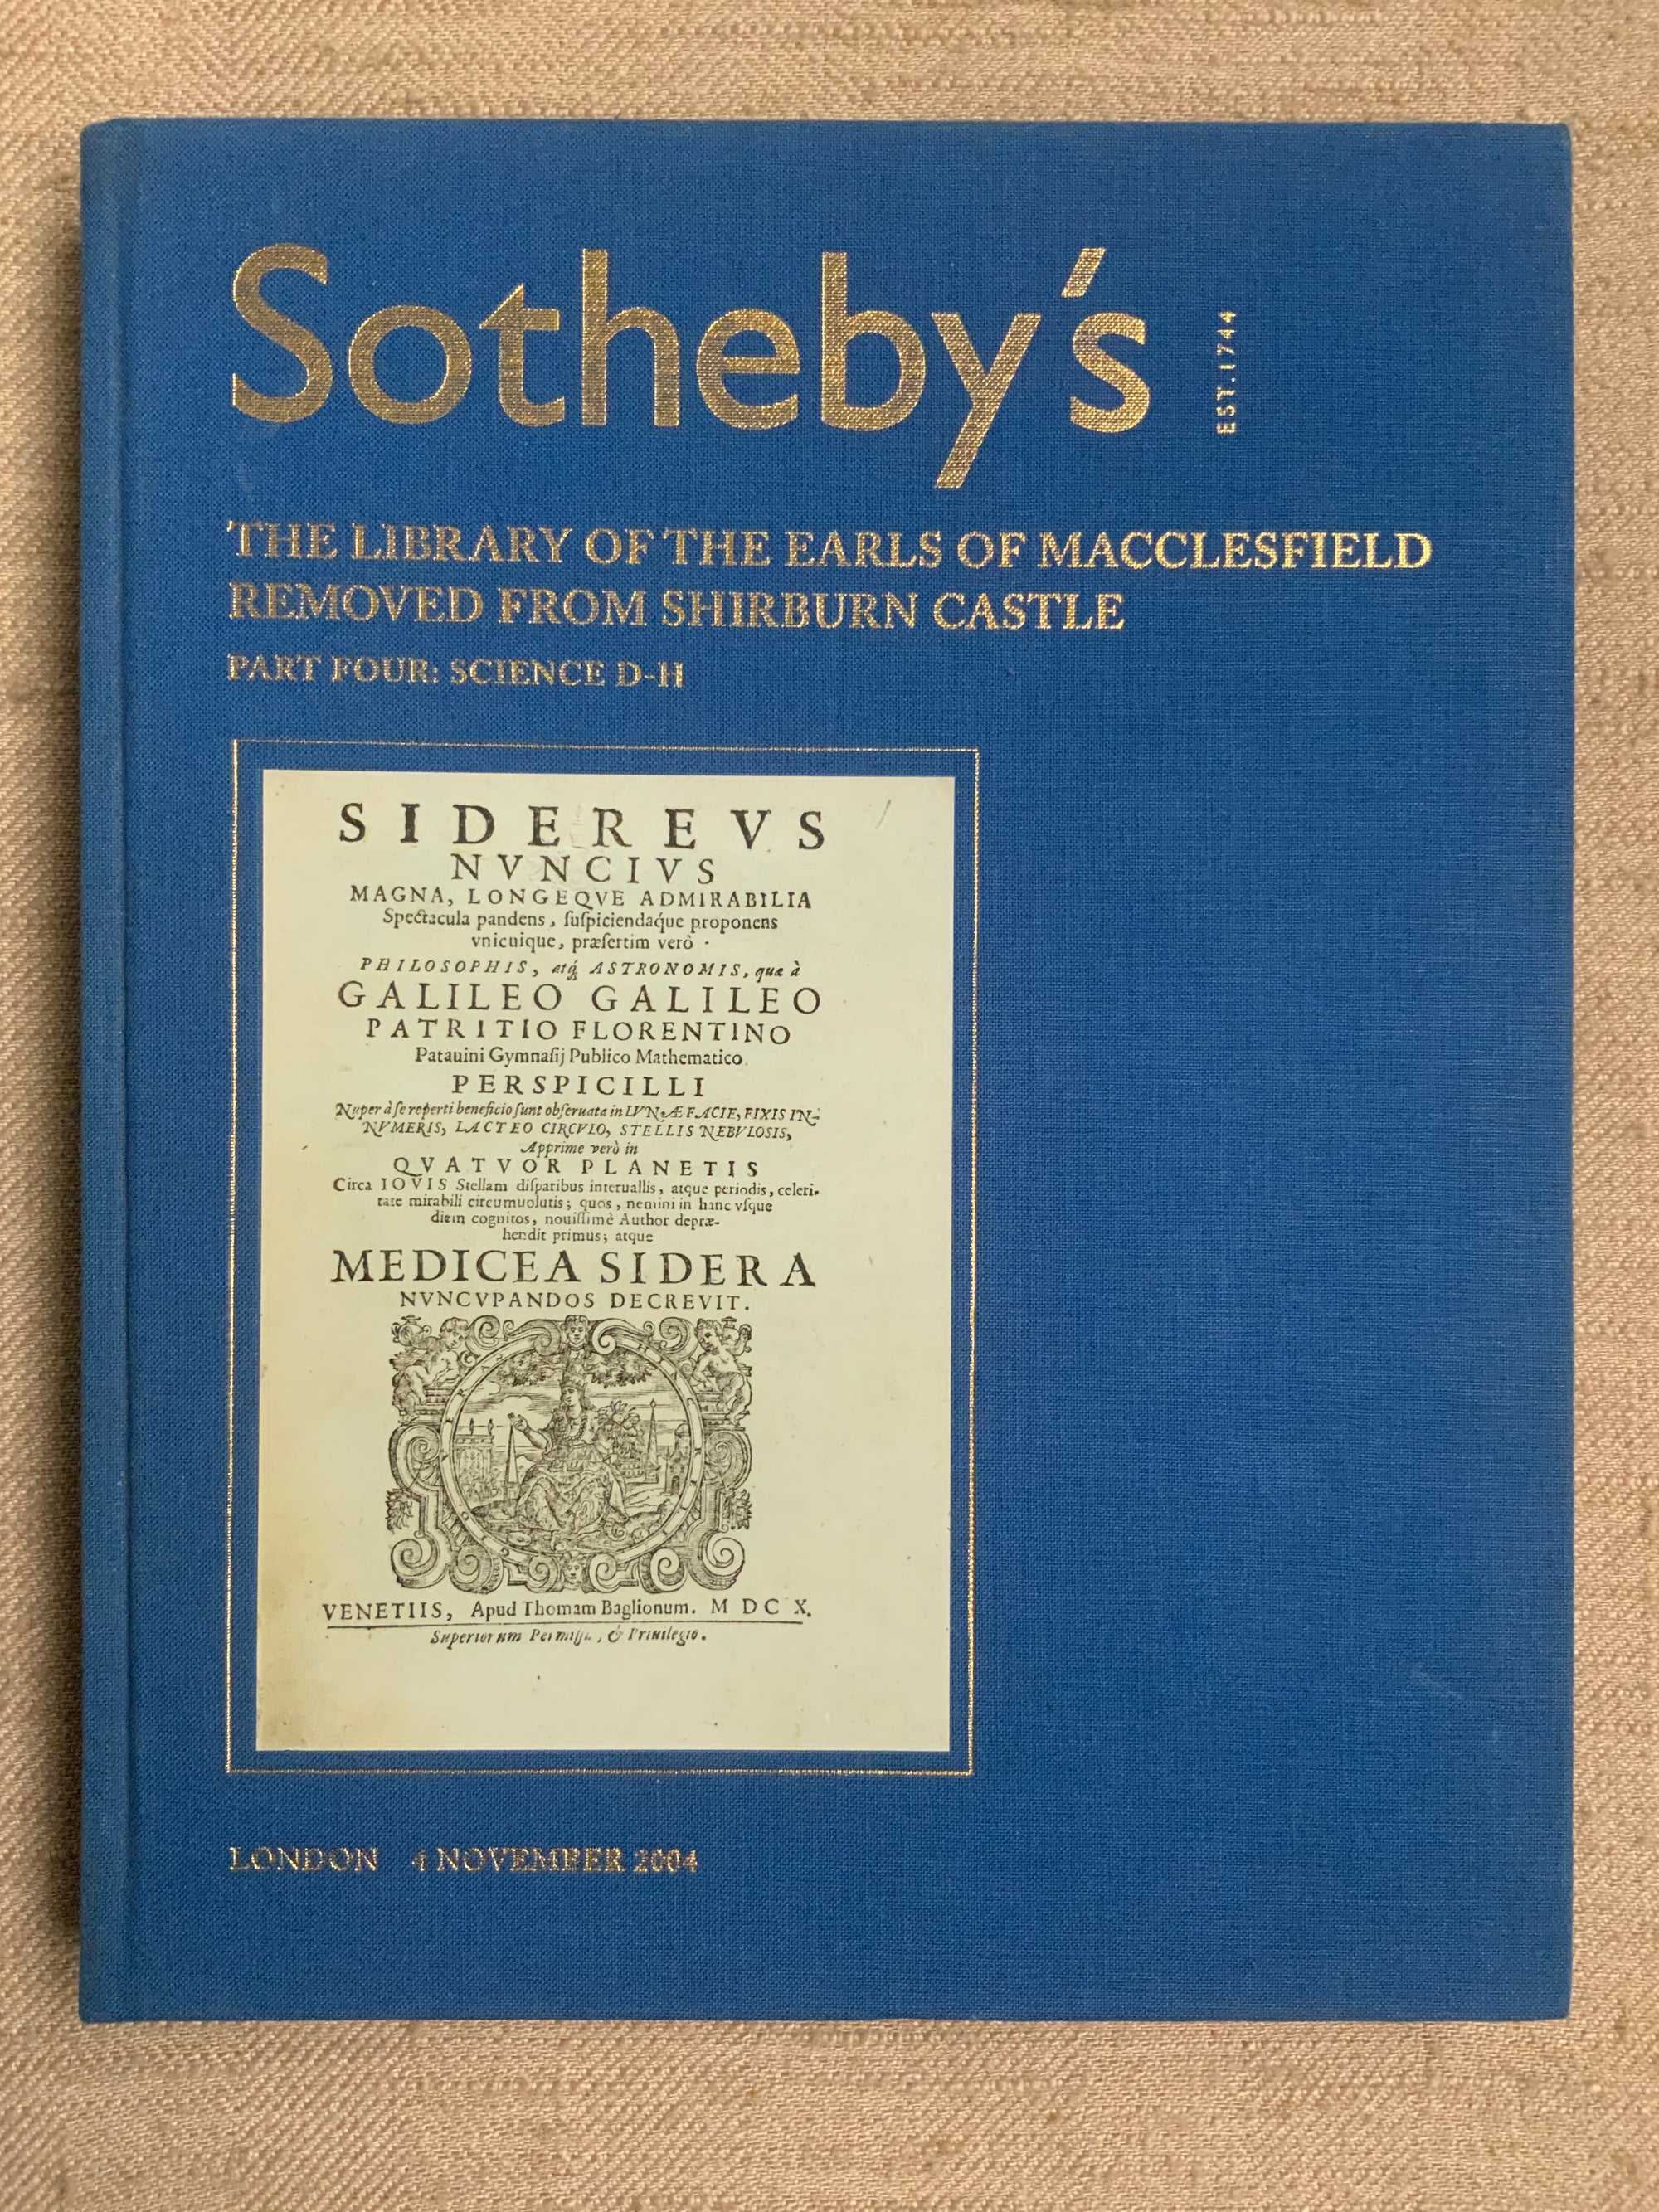 Sotheby's London • Macclesfield Library • Part Four: Science D-H